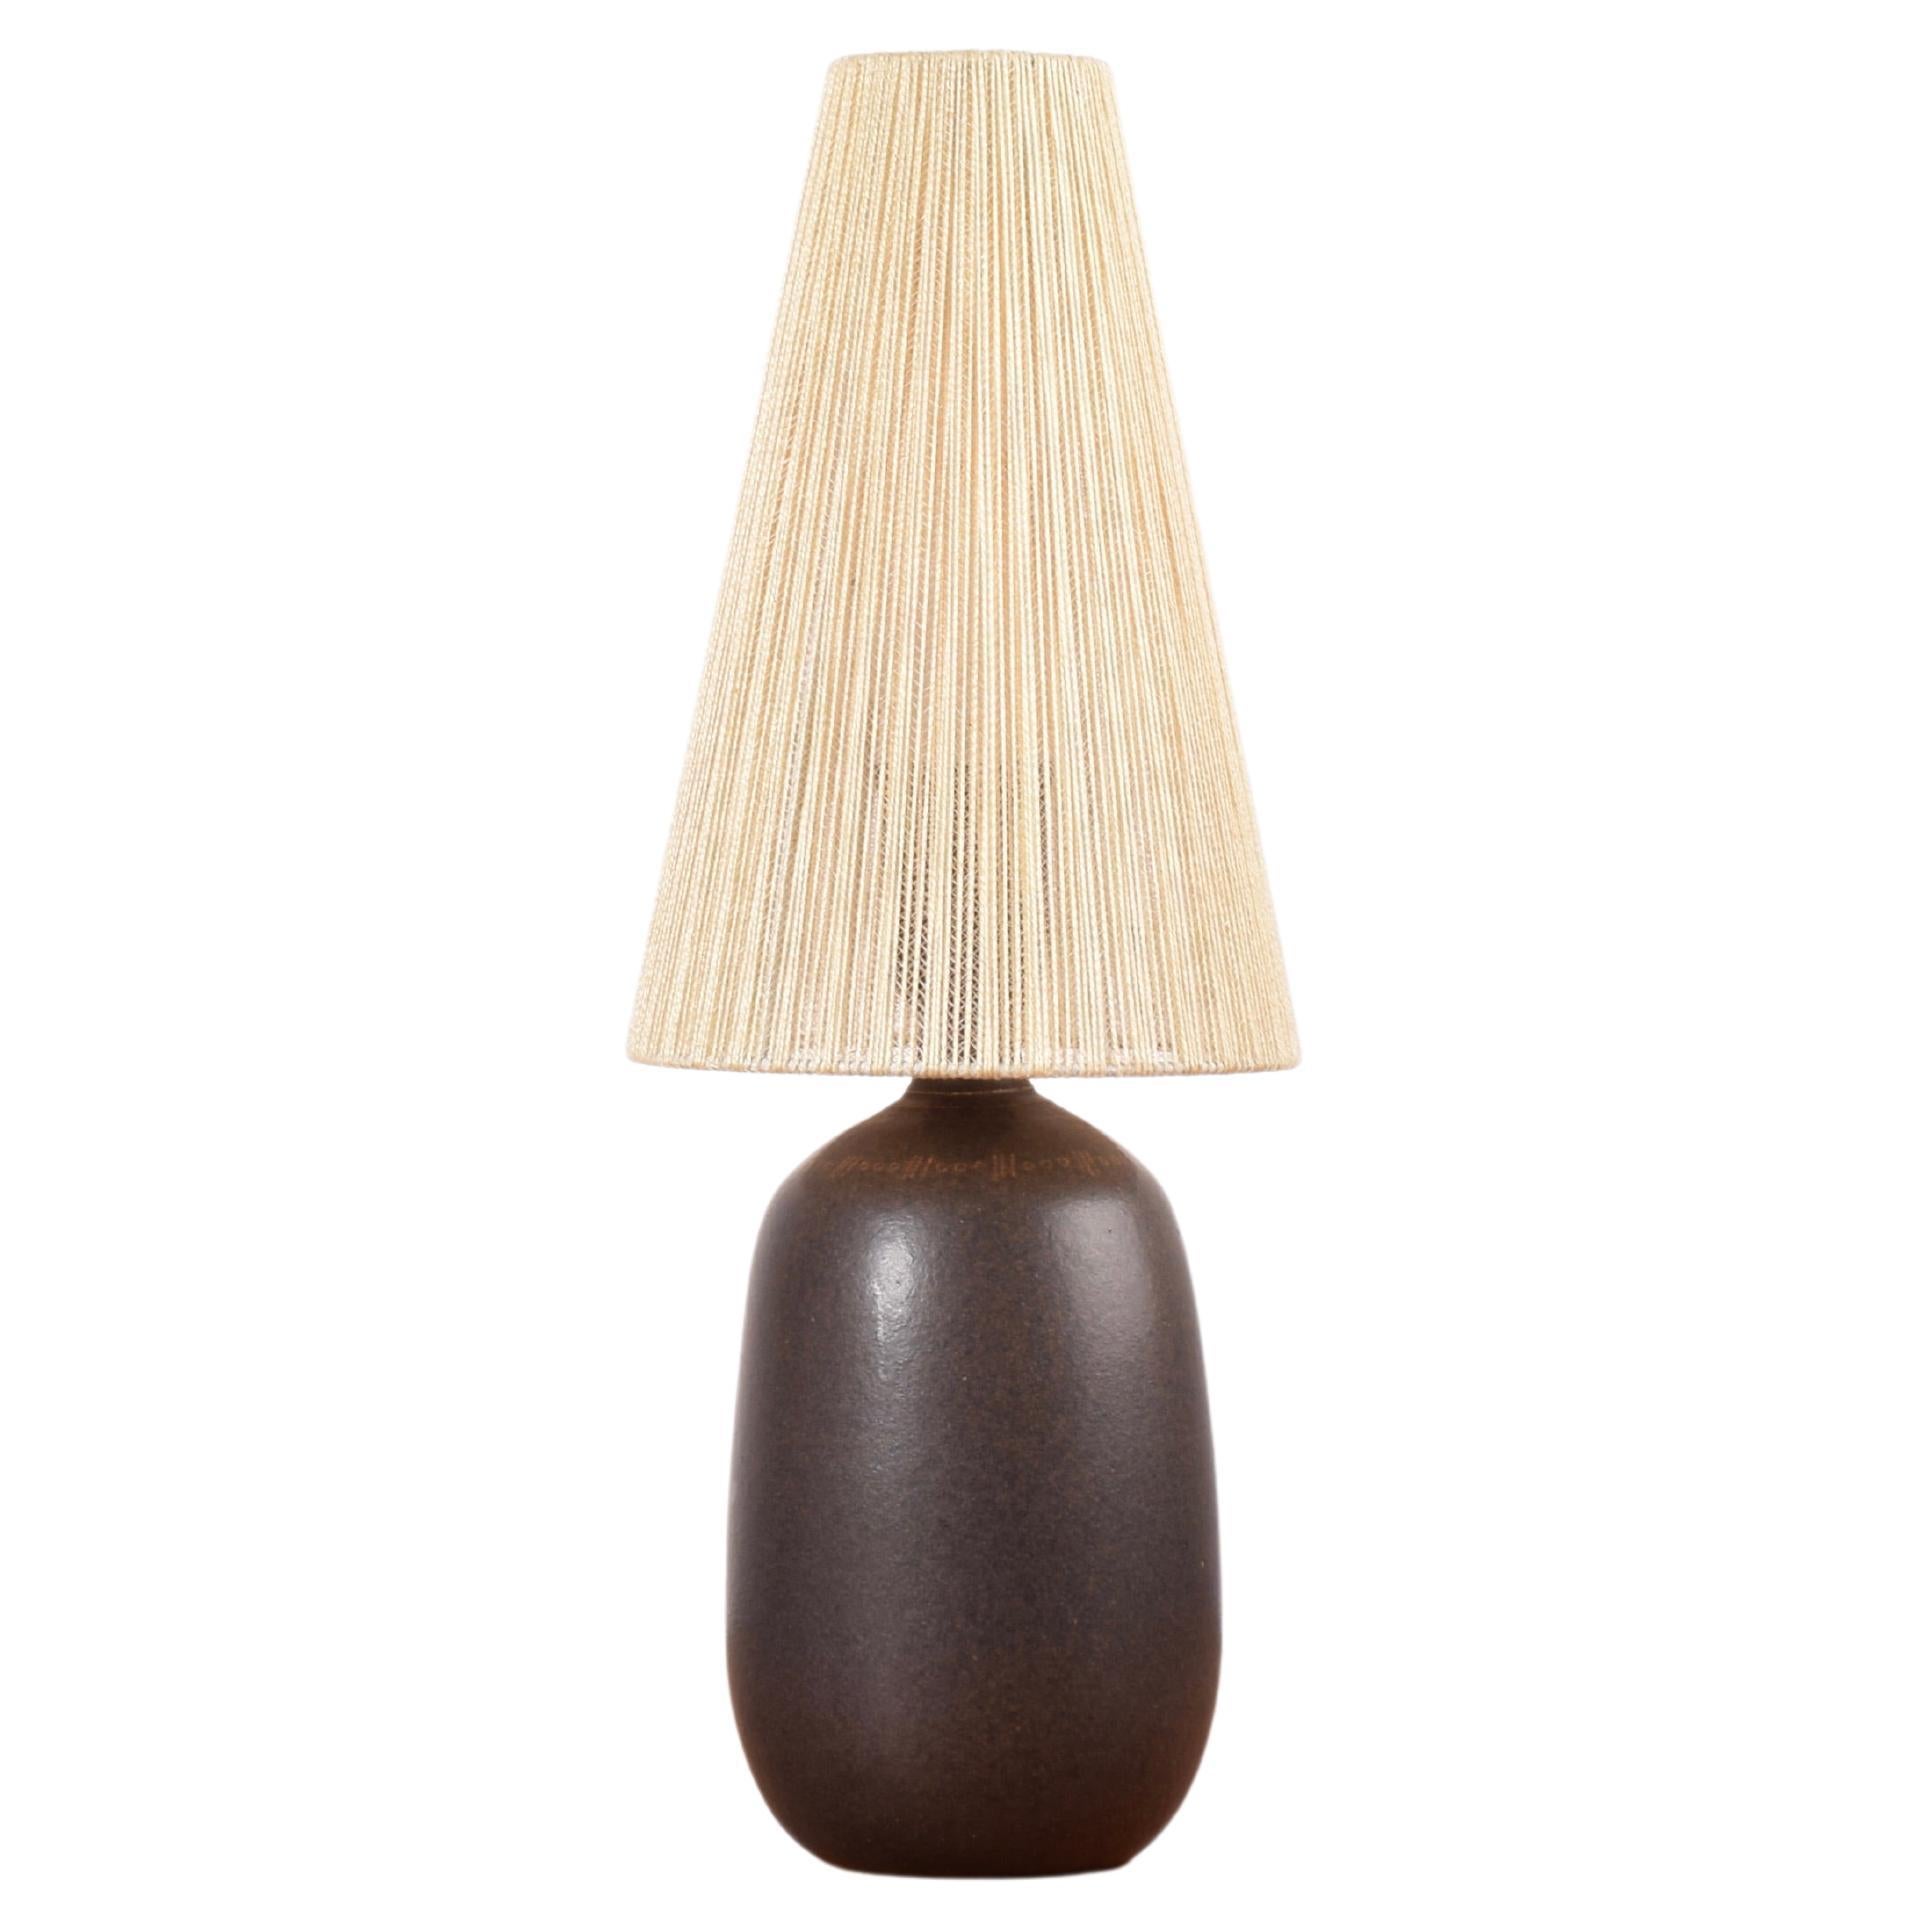 Agne Aronsson Aronson Mid-Century Table Lamp Brown Original Shade, Sweden 1960s For Sale